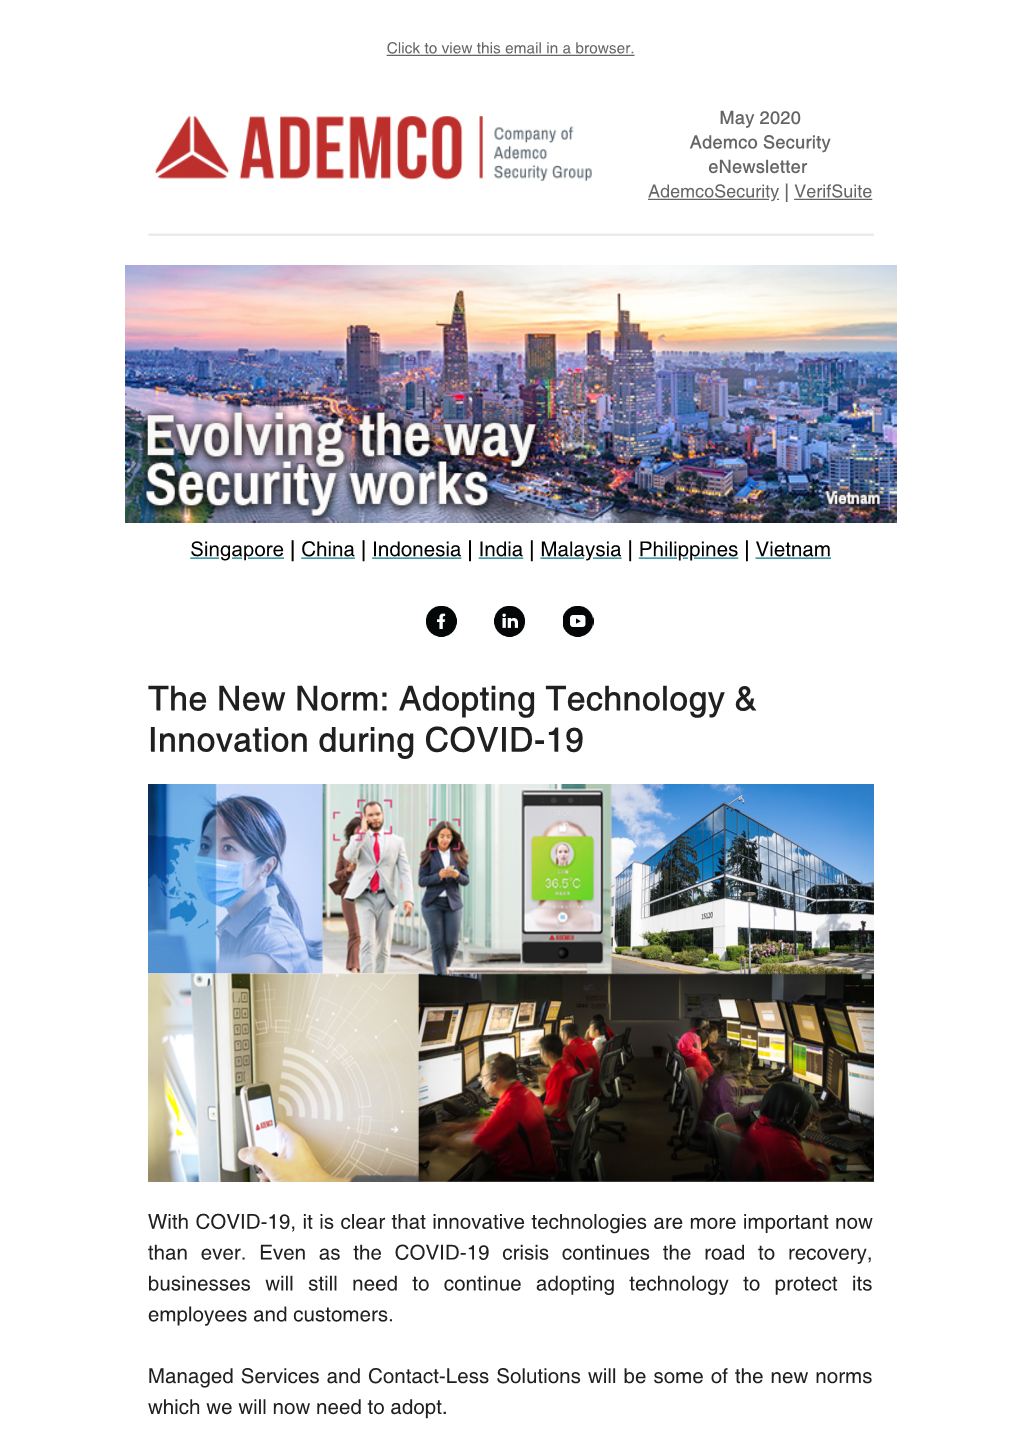 The New Norm: Adopting Technology & Innovation During COVID-19